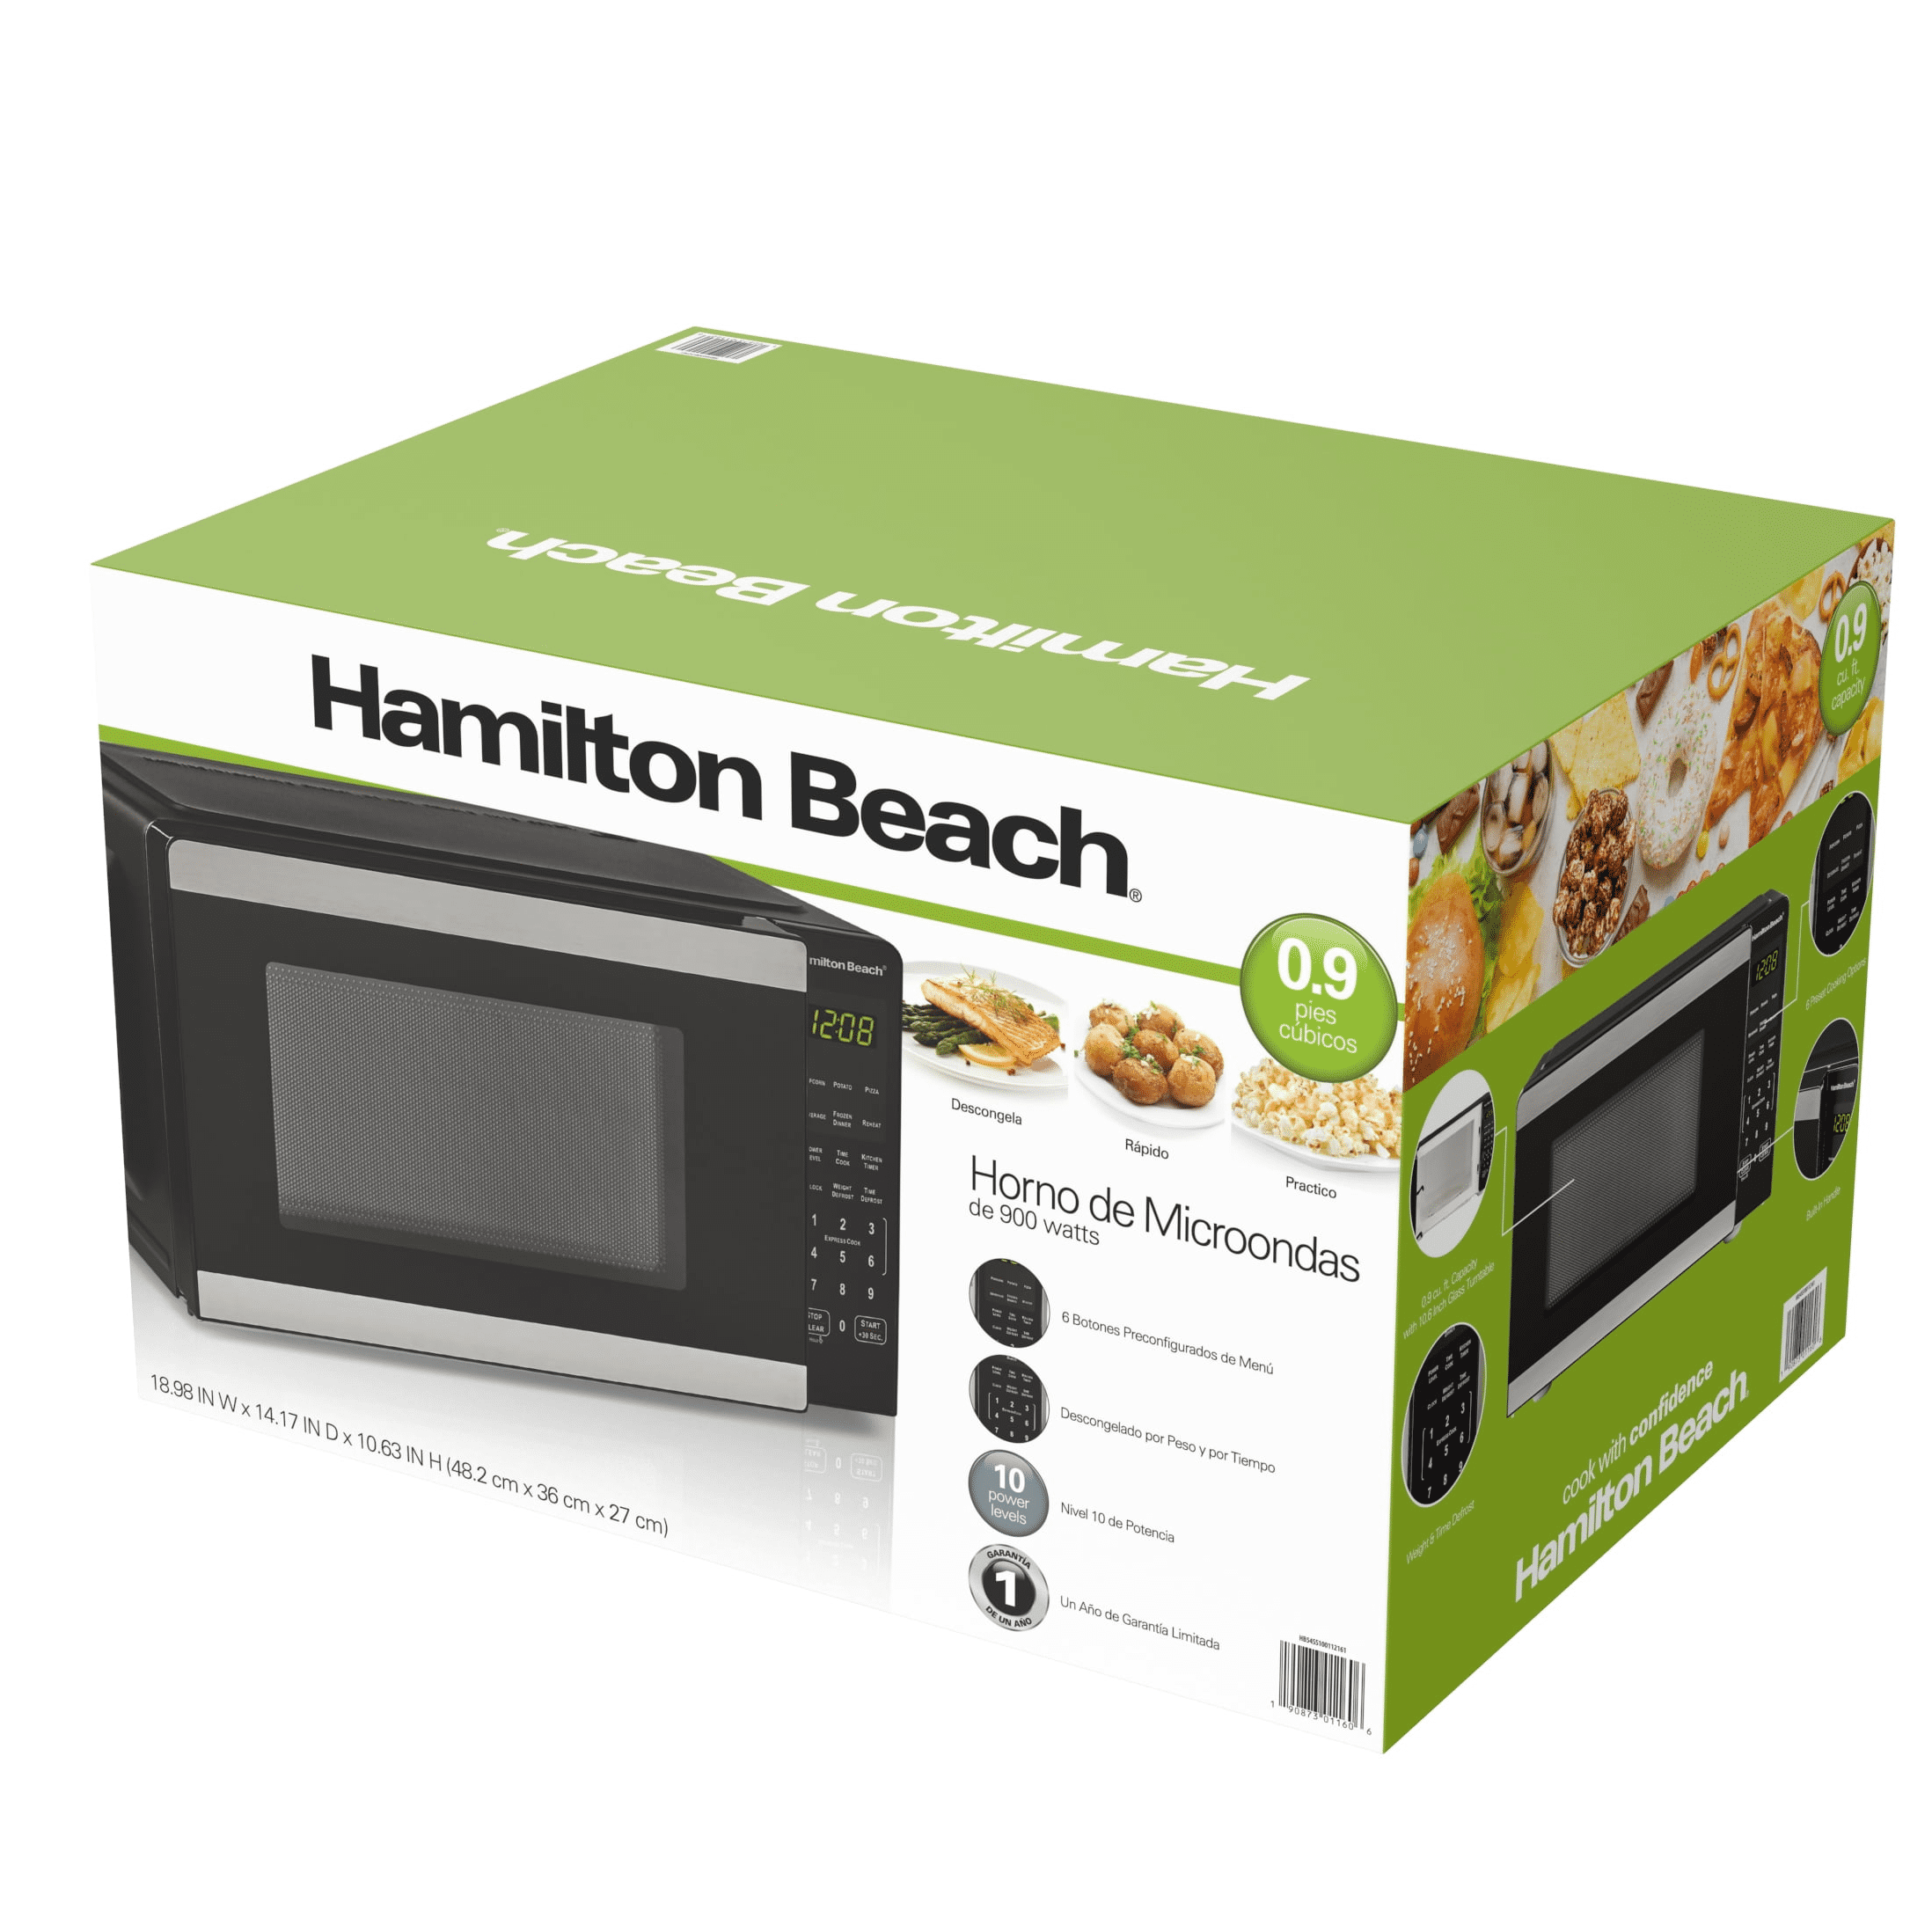 Hamilton Beach 0.9 Cu. ft. 900W Red Microwave oven